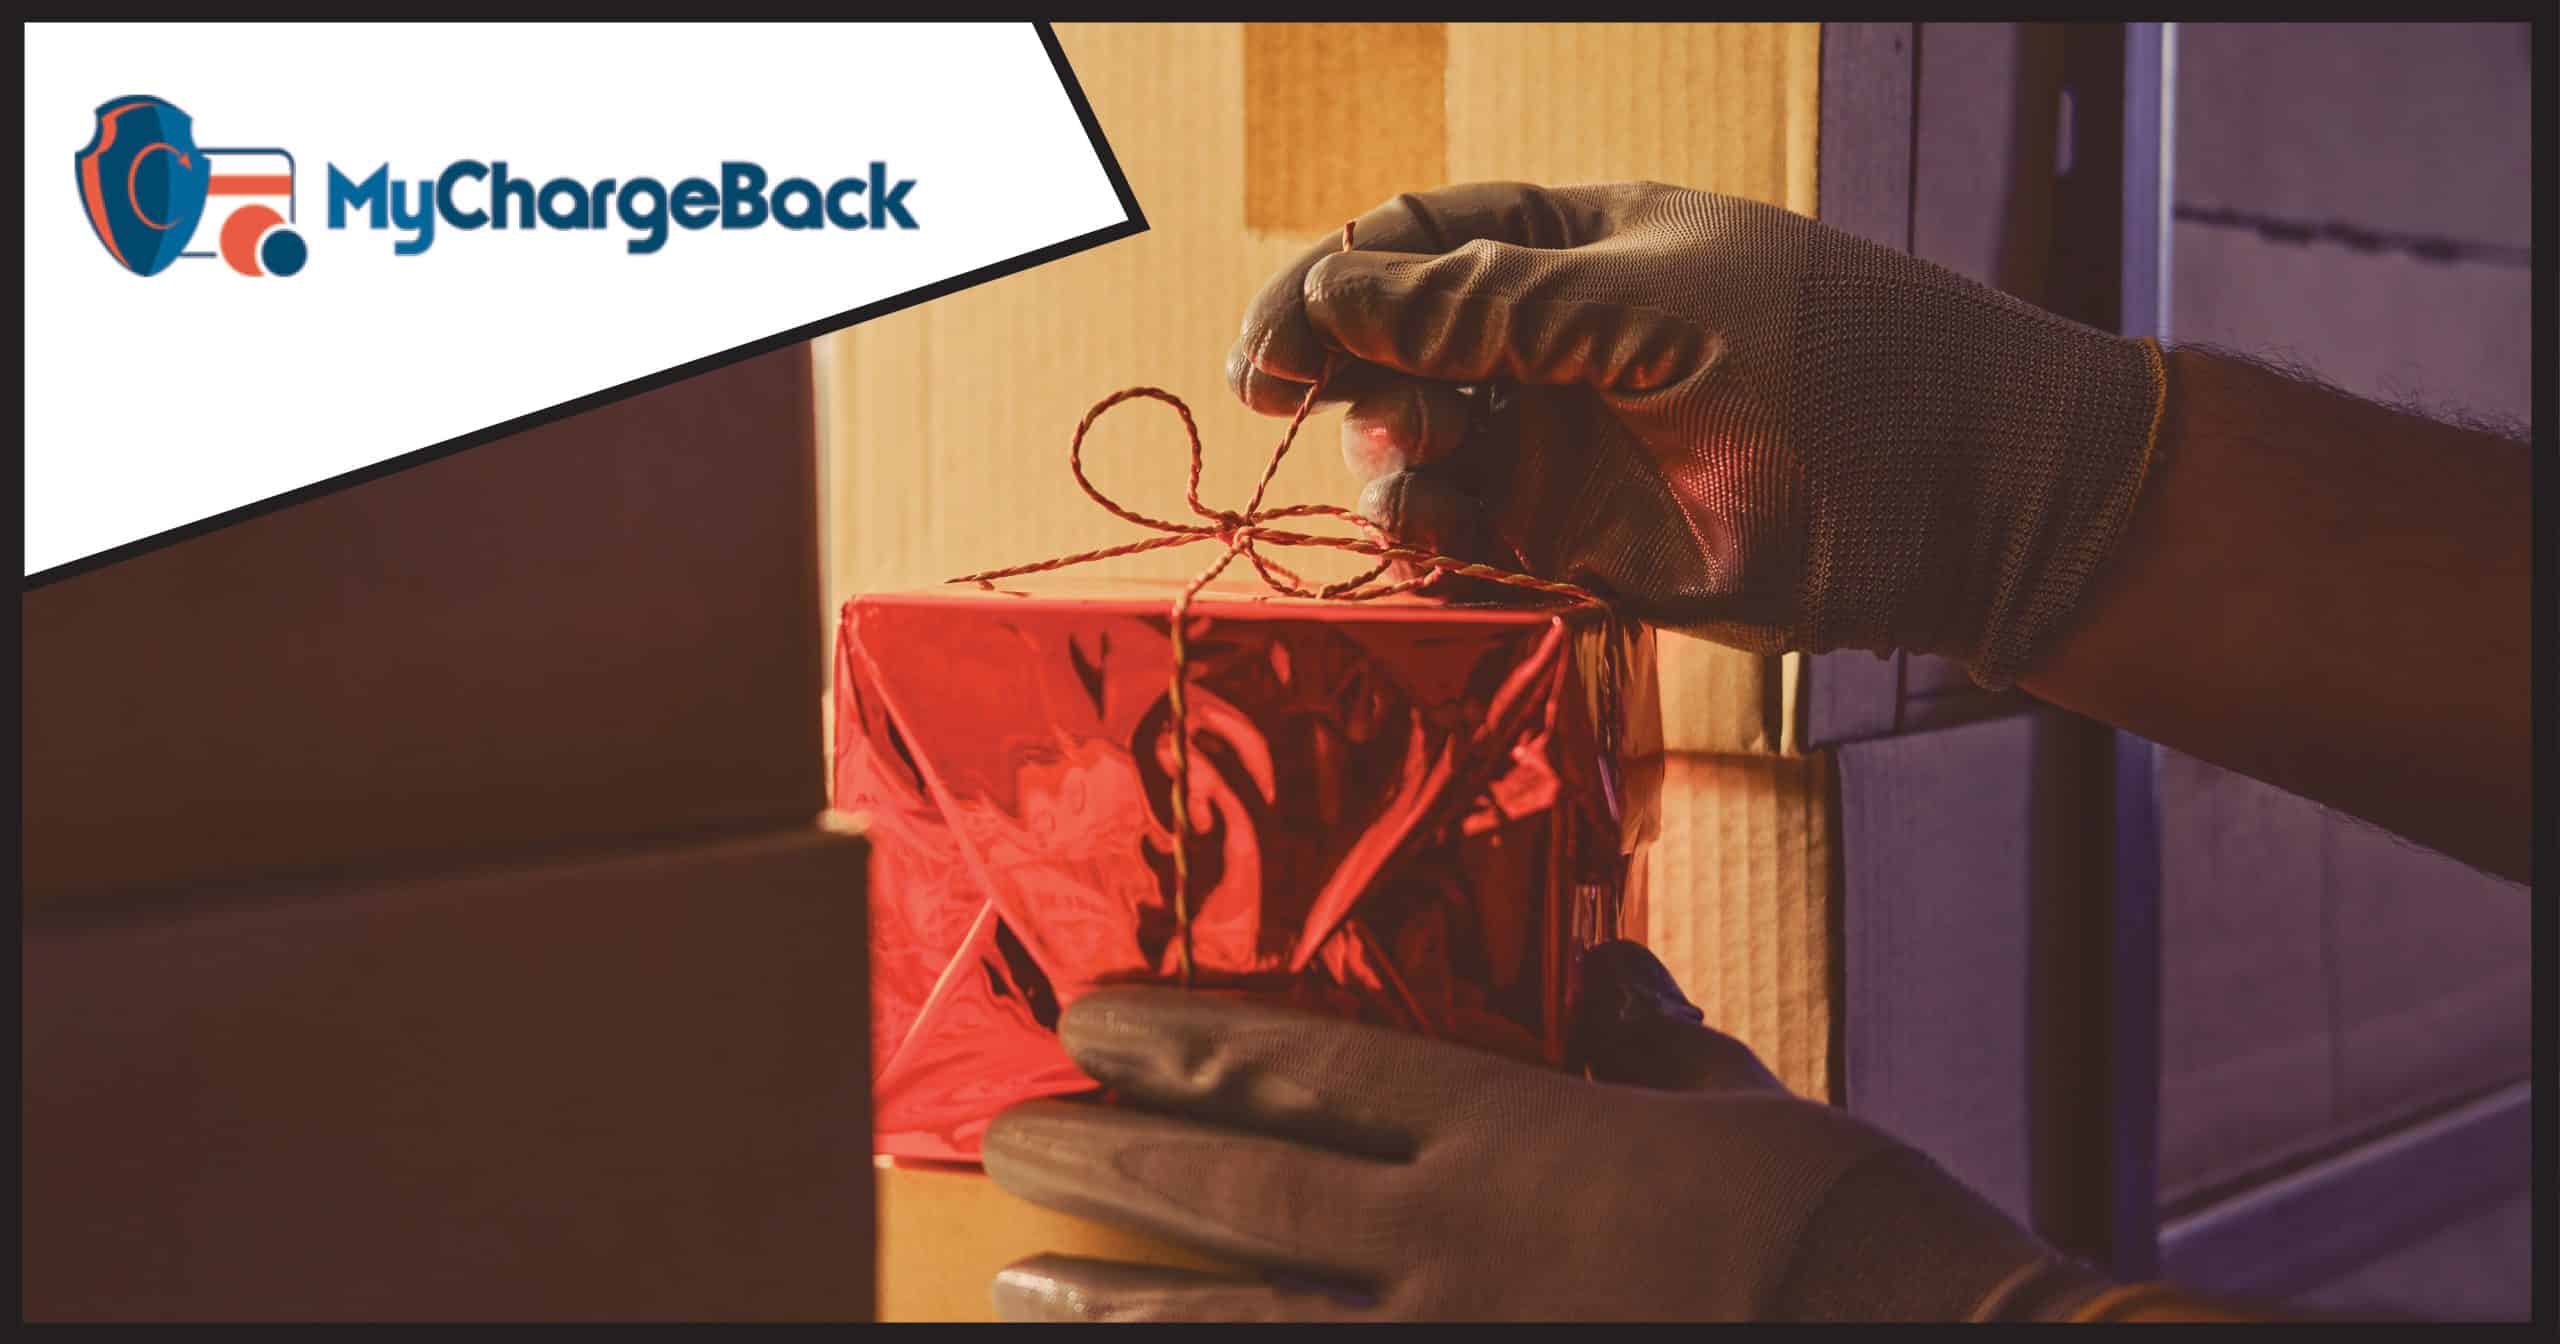 Hands touching a wrapped gift, used to illustrate a fake delivery scam associated with black friday and cyber monday shopping